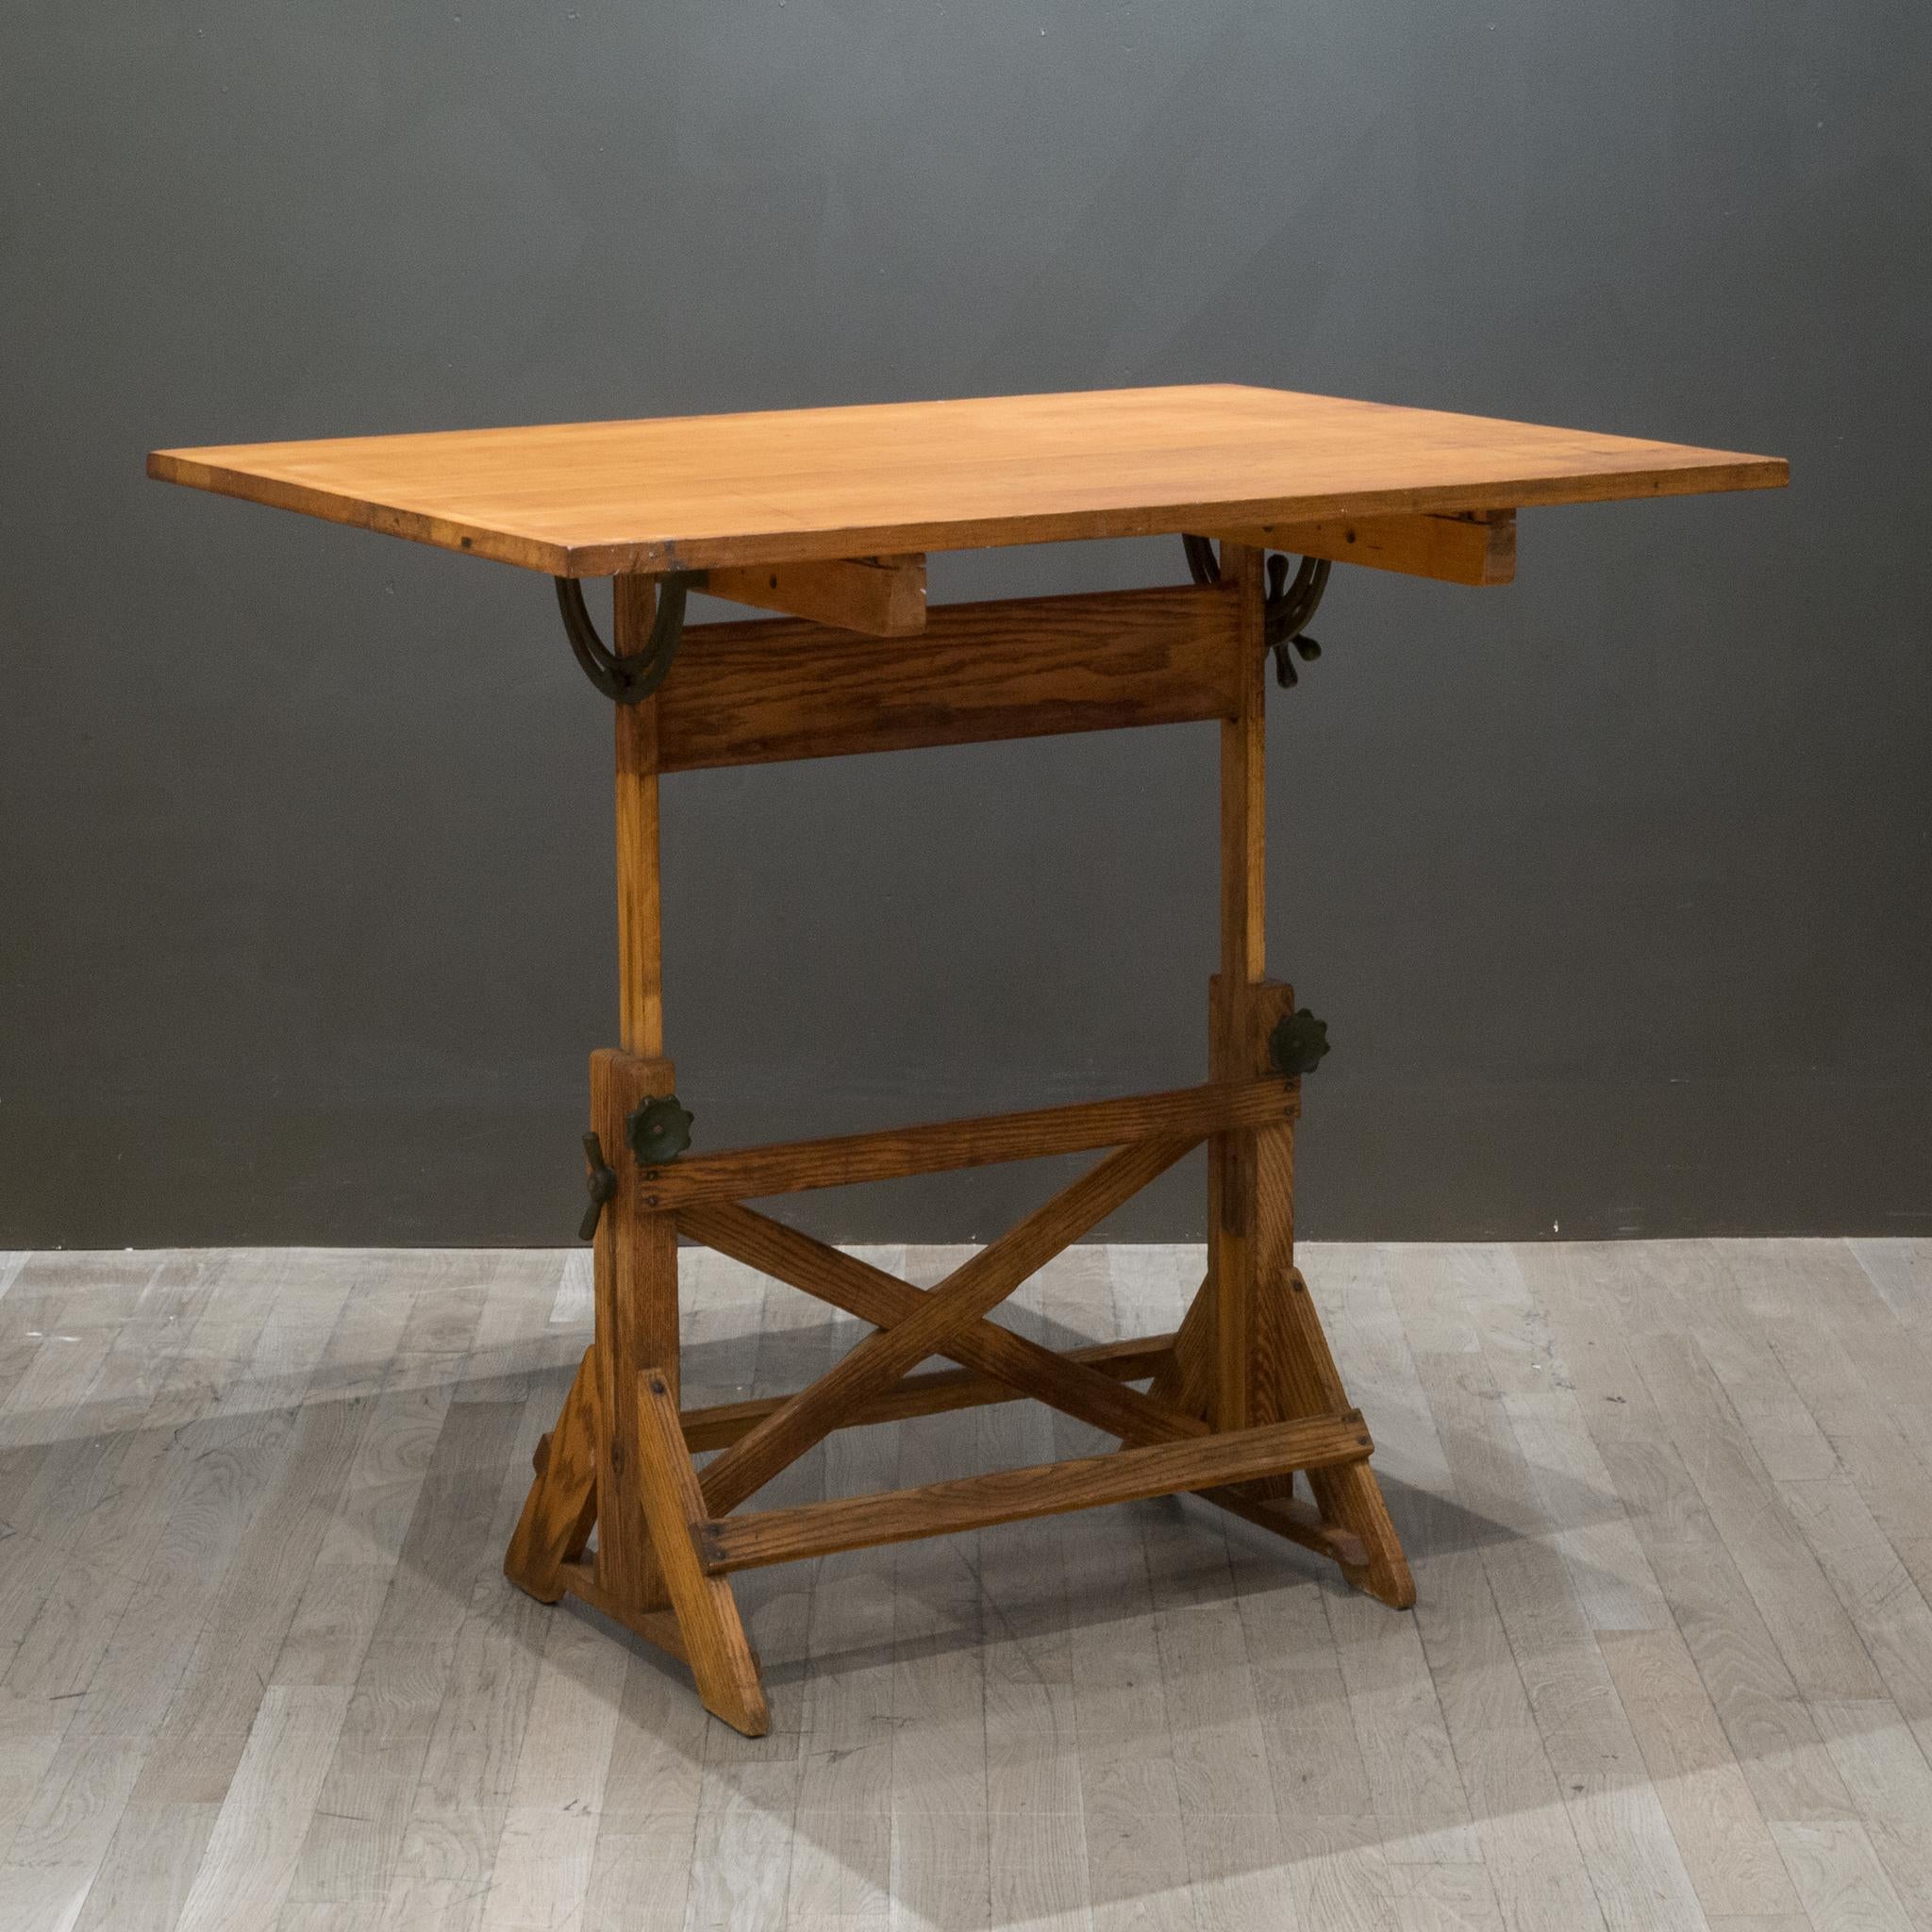 About

A fully adjustable industrial wooden drafting table with green steel and cast iron knobs and brackets. The table can be used as a dining table, desk or drafting table. The top swivels at any angle and from either side. The whole table can be